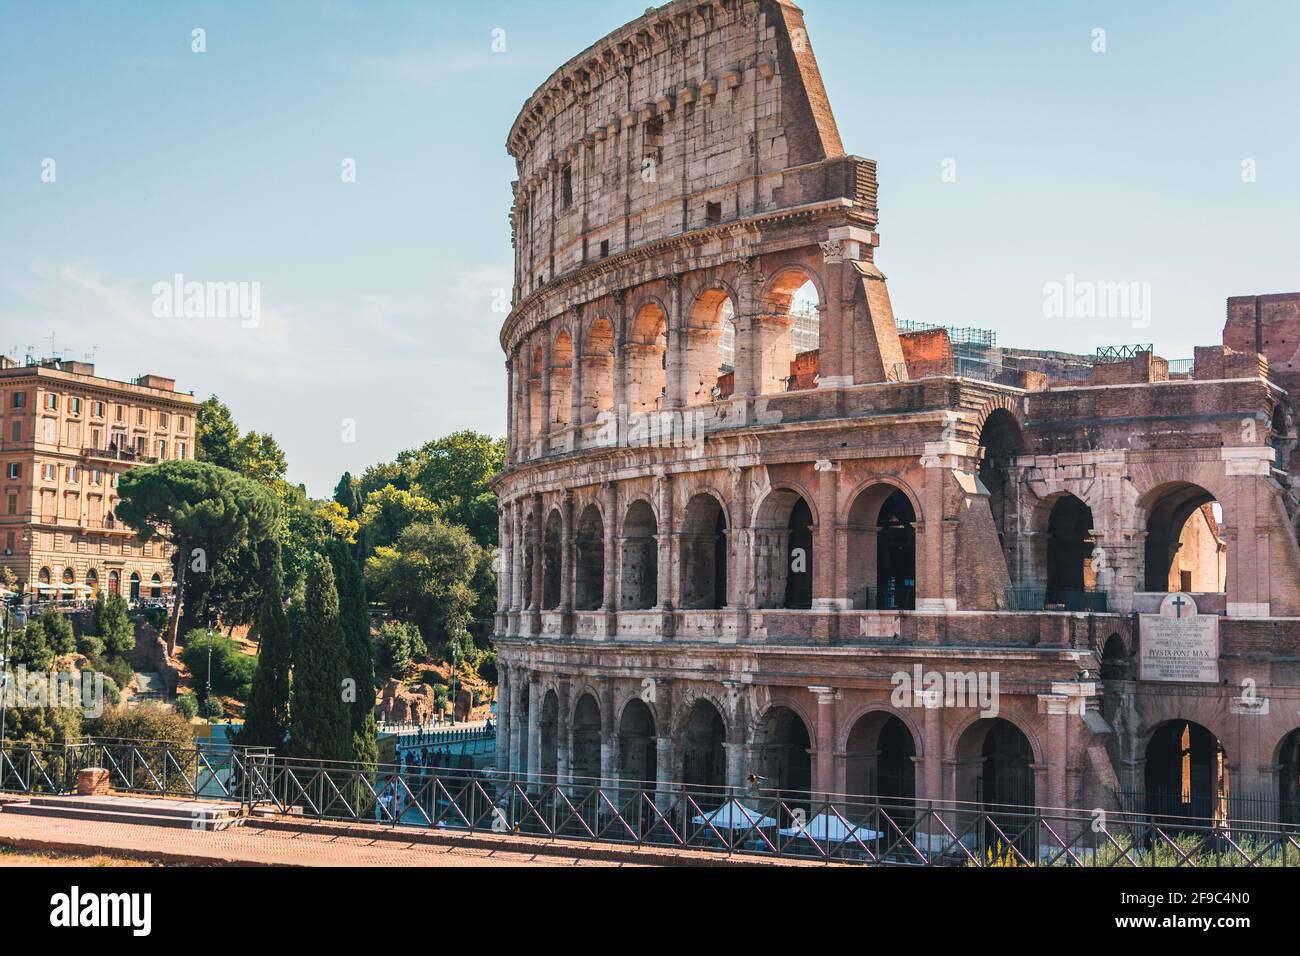 Coliseum, Colosseum, Rome, Italy. Ancient Roman Coliseum is famous landmark, top tourist attraction of Rome. Scenic view of Coliseum with trees and bl Stock Photo